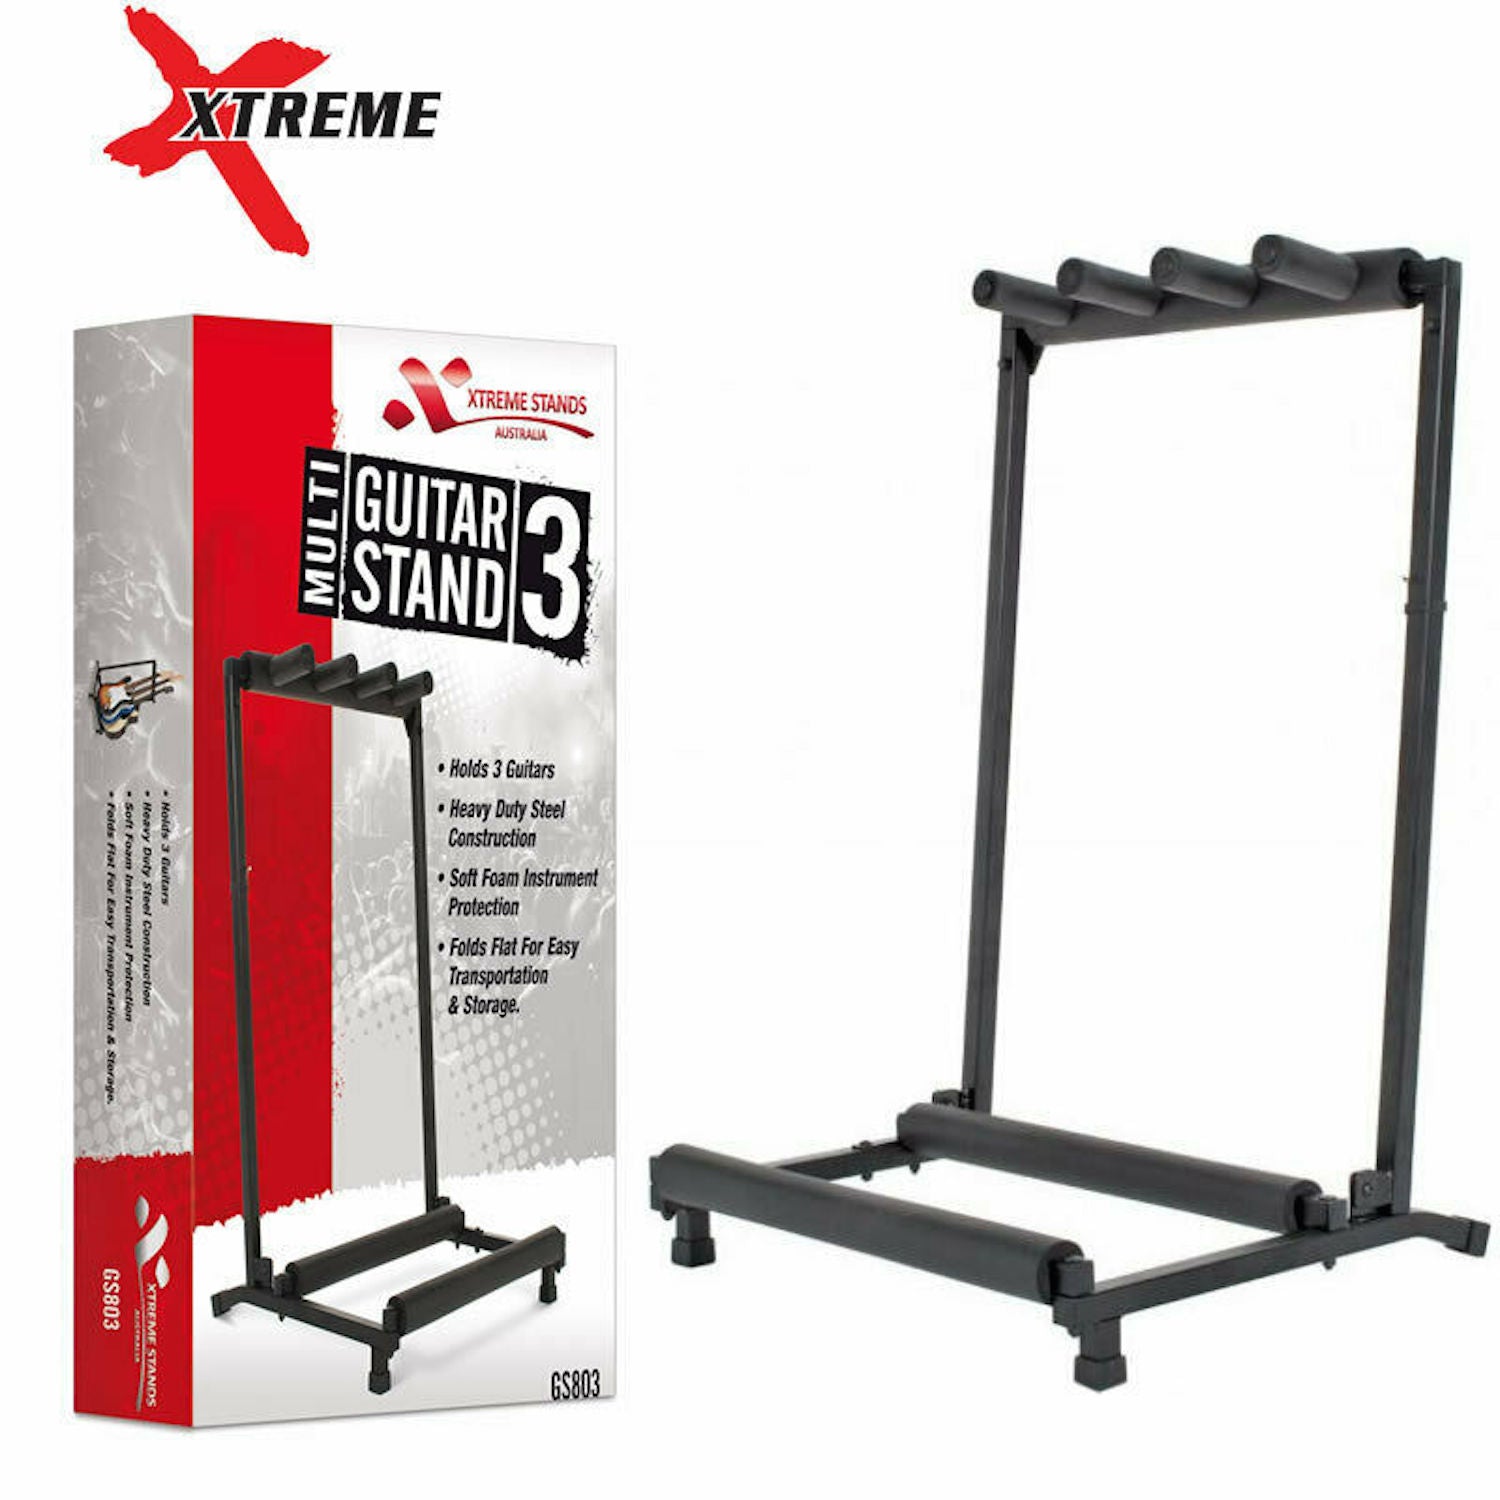 Xtreme GS803 3 Multi Rack Guitar Stand